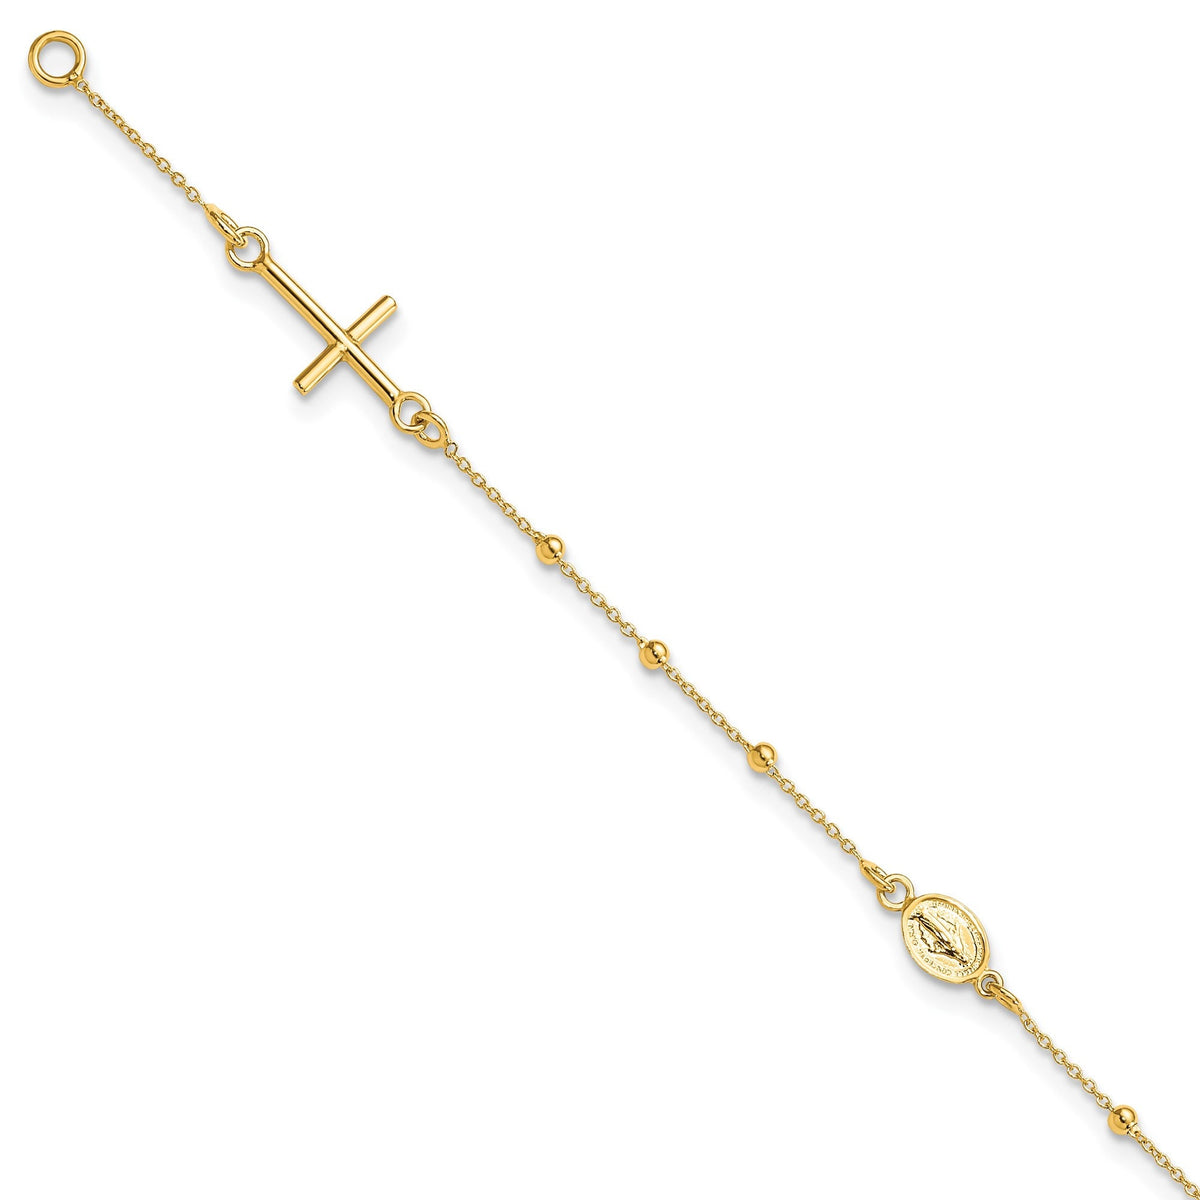 14k Yellow Gold Polished Cross Rosary 7.5 inch Bracelet - Gift Box Included